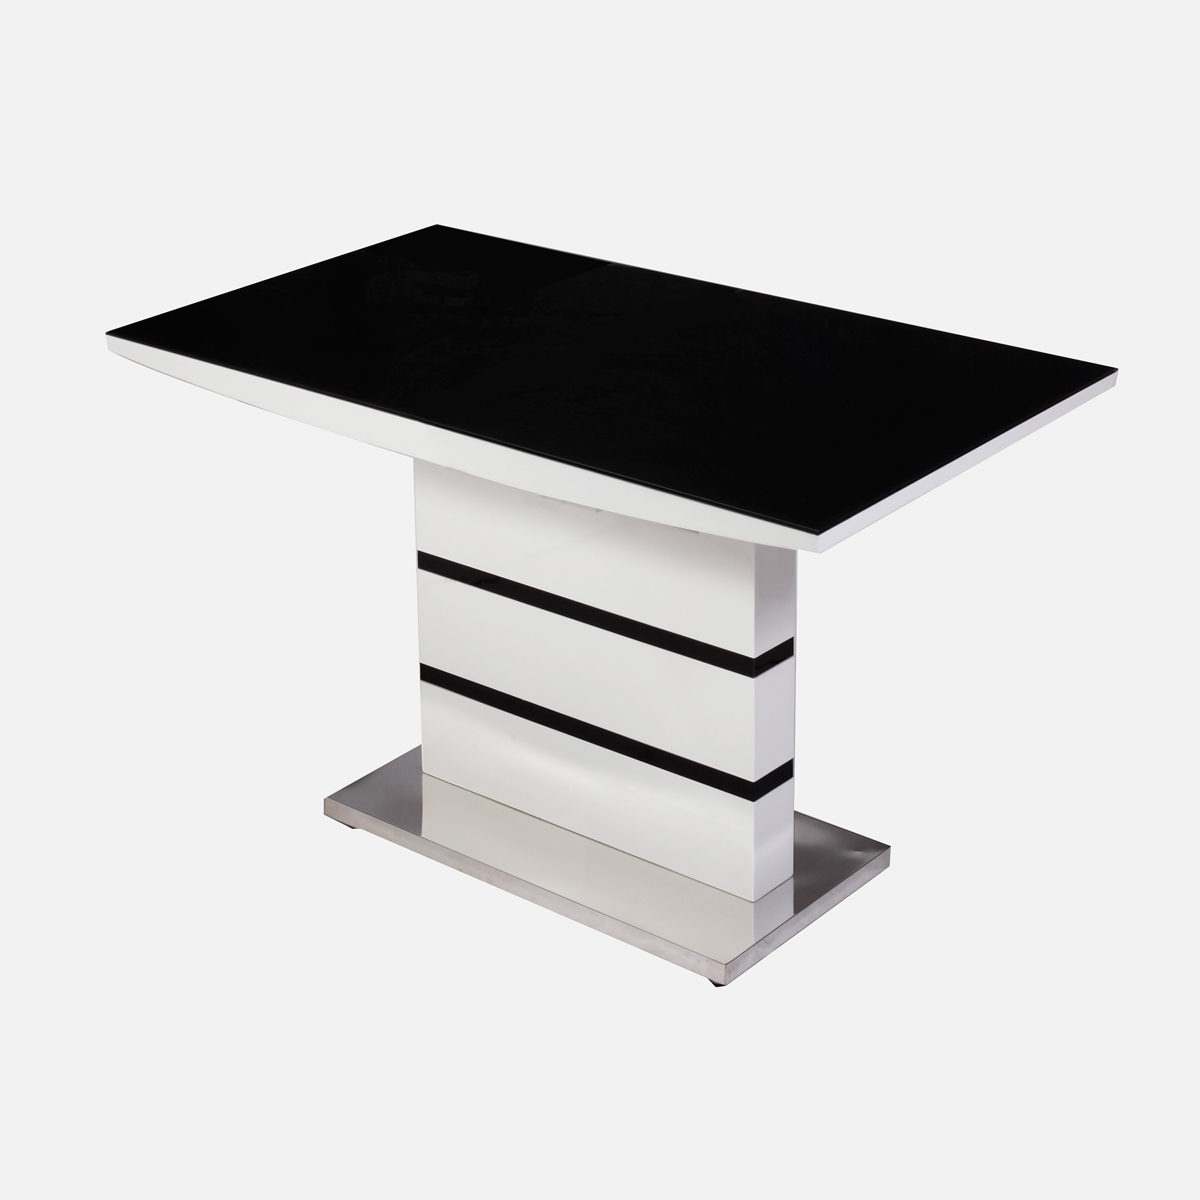 ALDRTABSMA Aldridge Small High Gloss Dining Table White with Black Glass Top